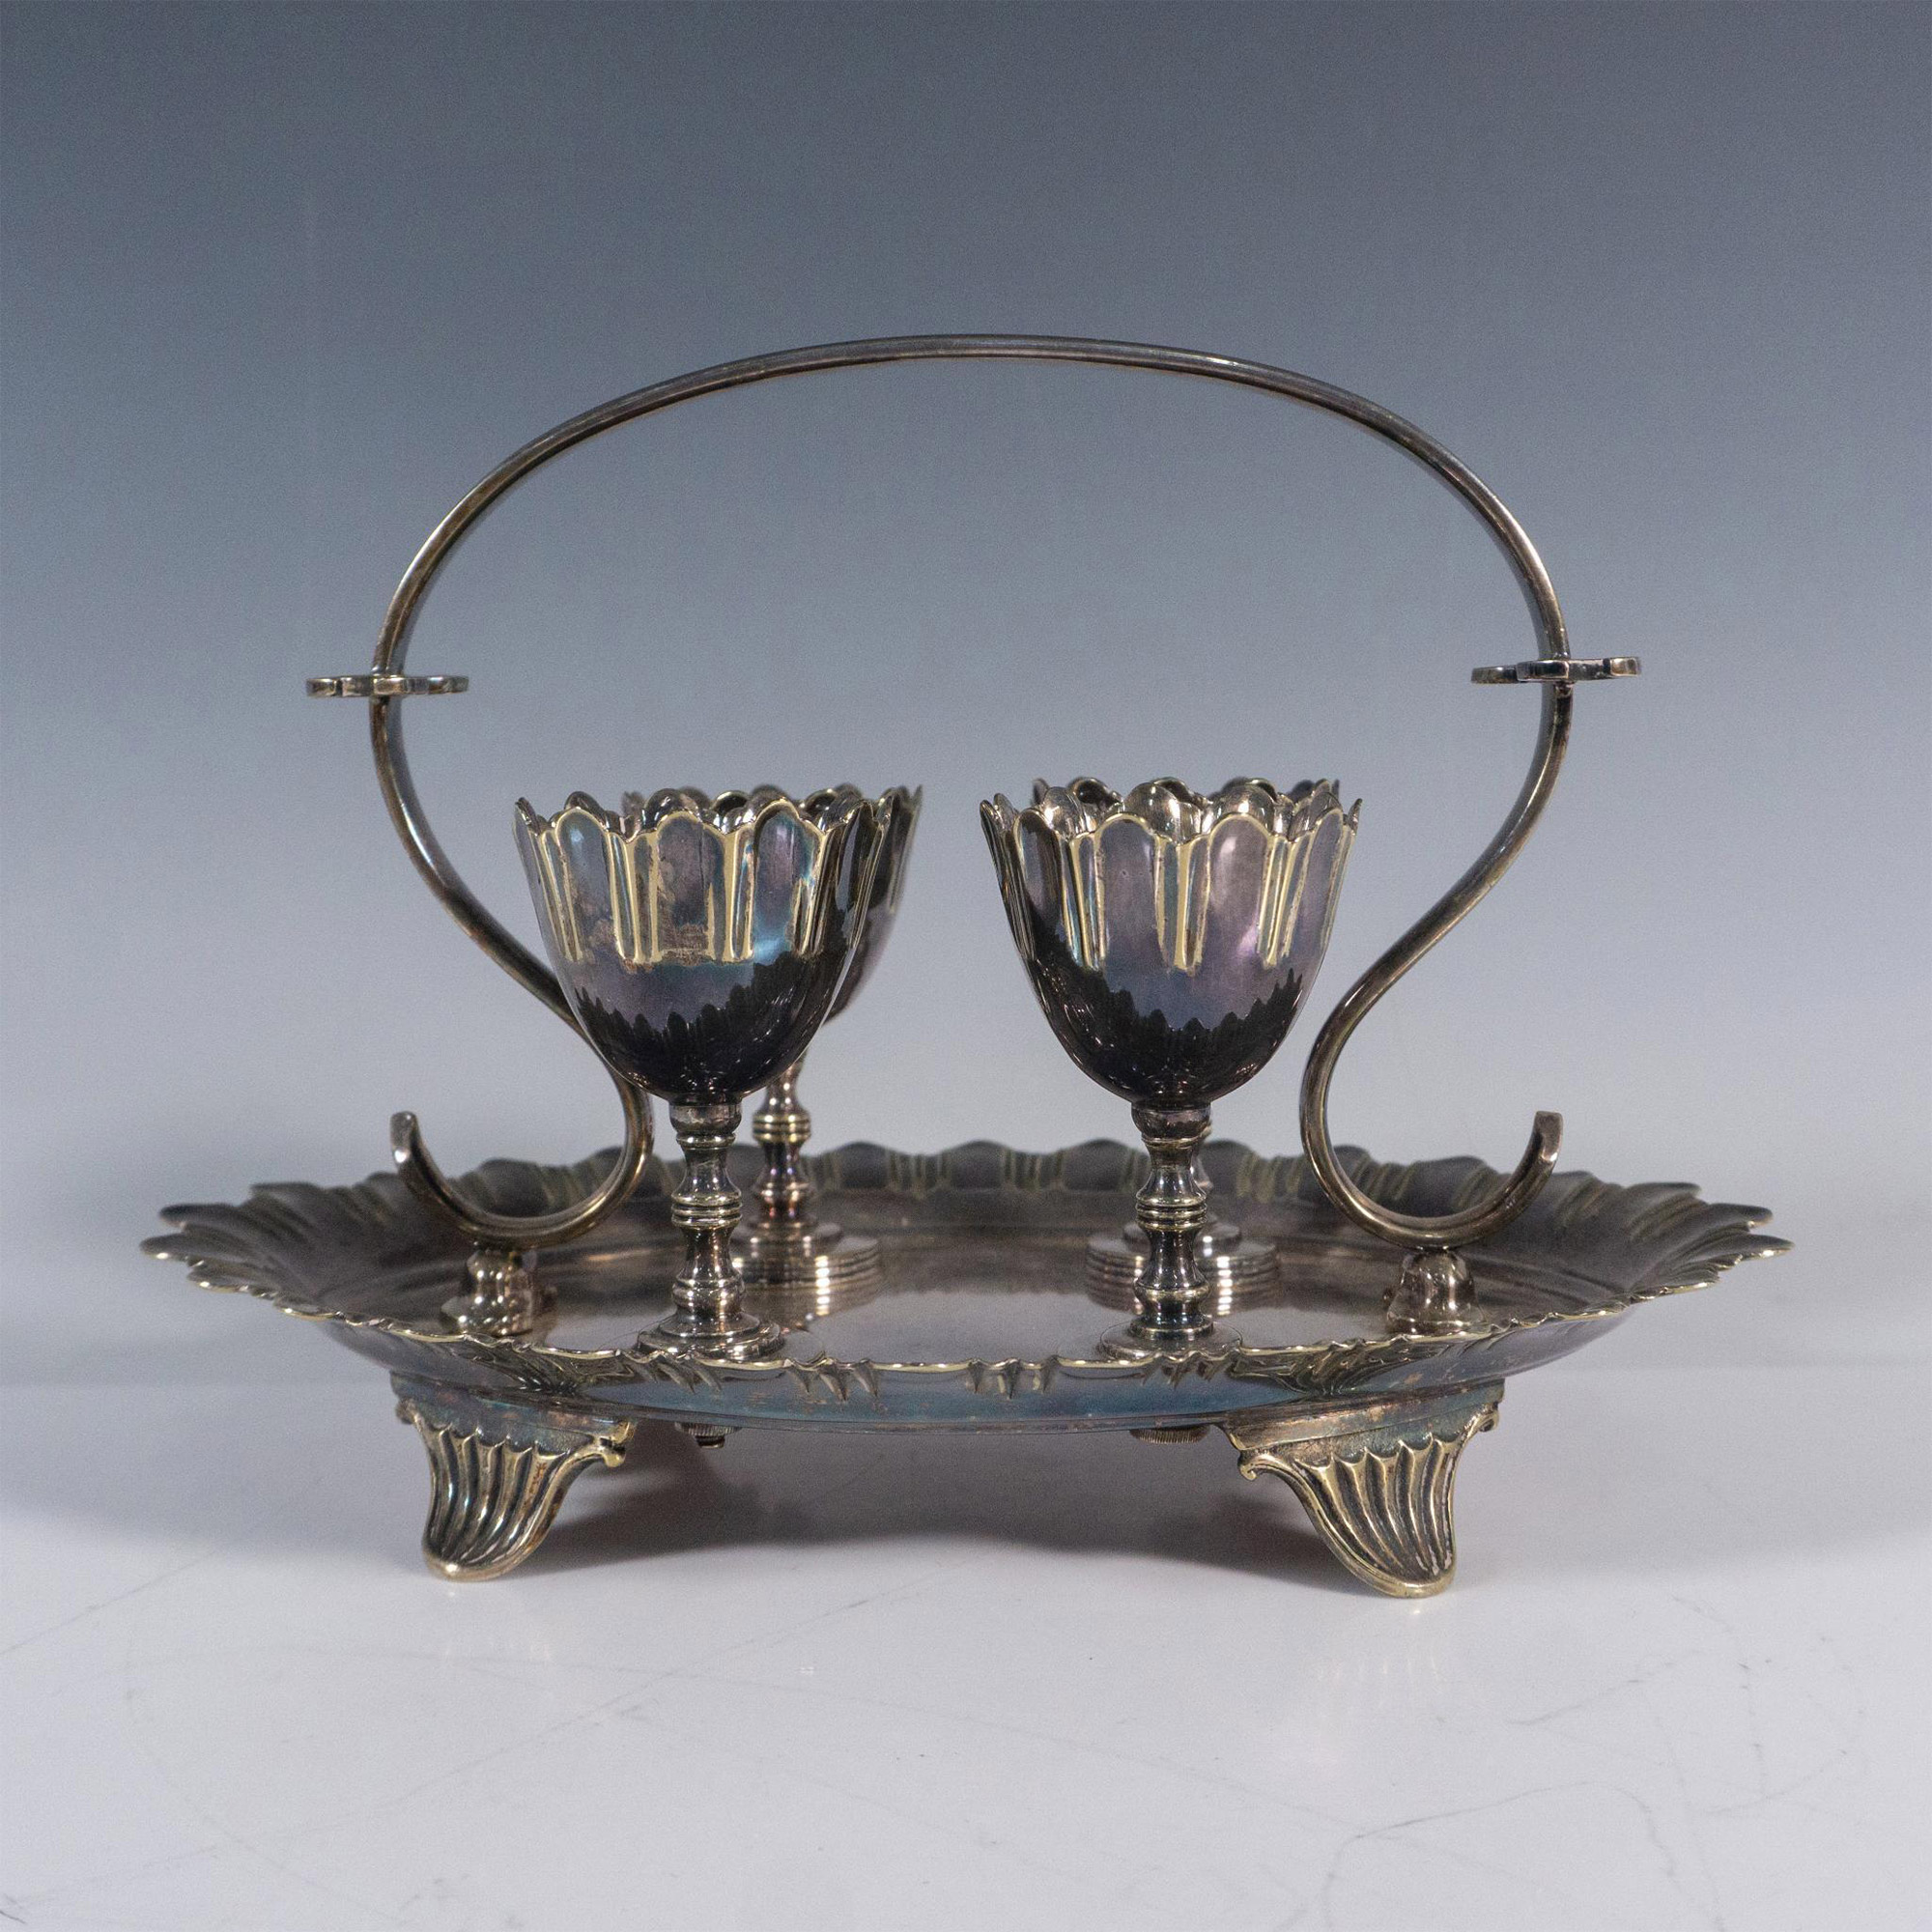 5pc Philip Ashberry & Sons Silverplated Caddy w/ Egg Cups - Image 2 of 4